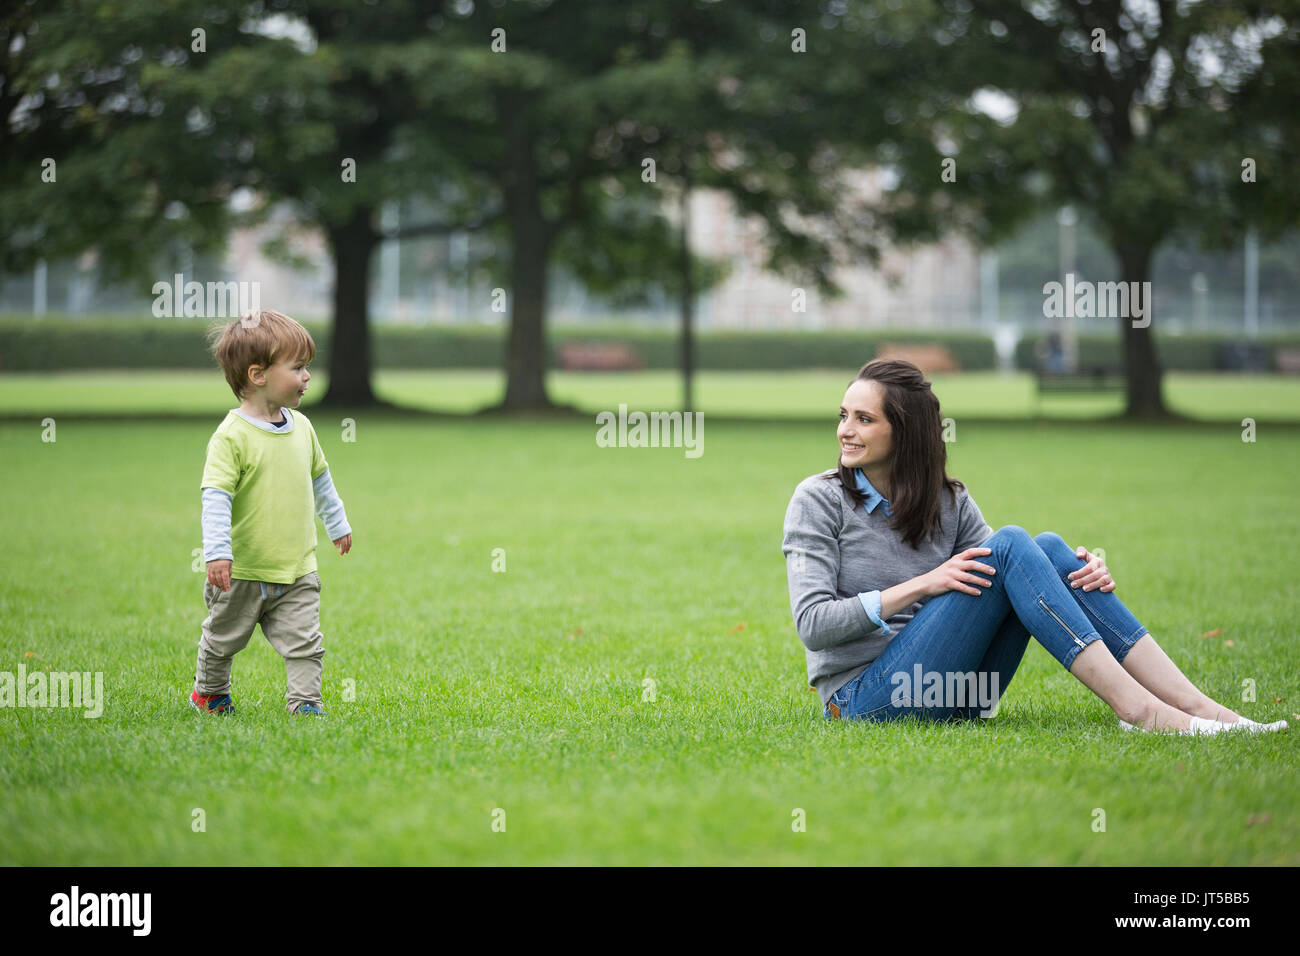 Happy Mother playing with her toddler son outdoors. Love and togetherness concept. Stock Photo